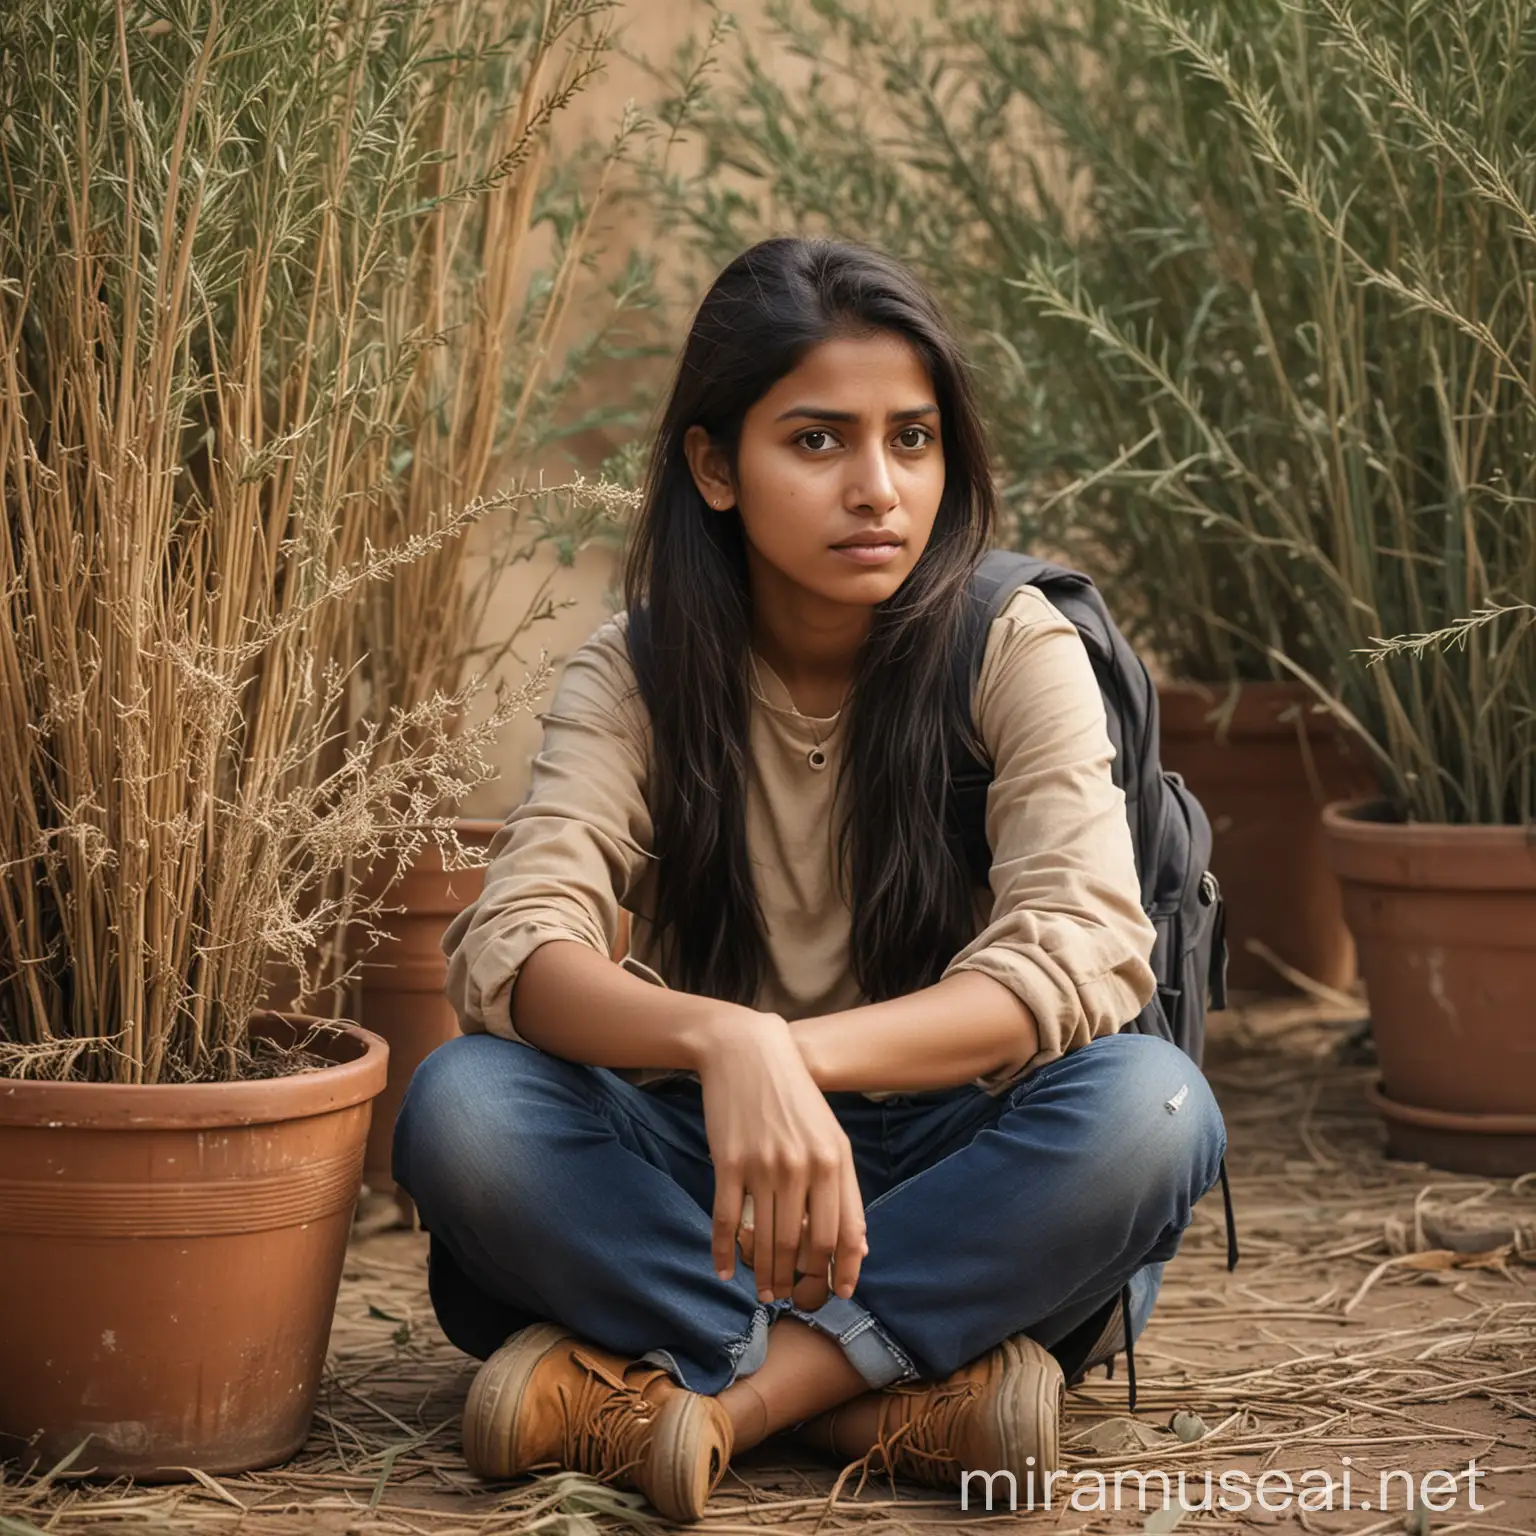 Indian Woman with Sad Expression Sitting by Dried Plant Natural Light Portrait Photography